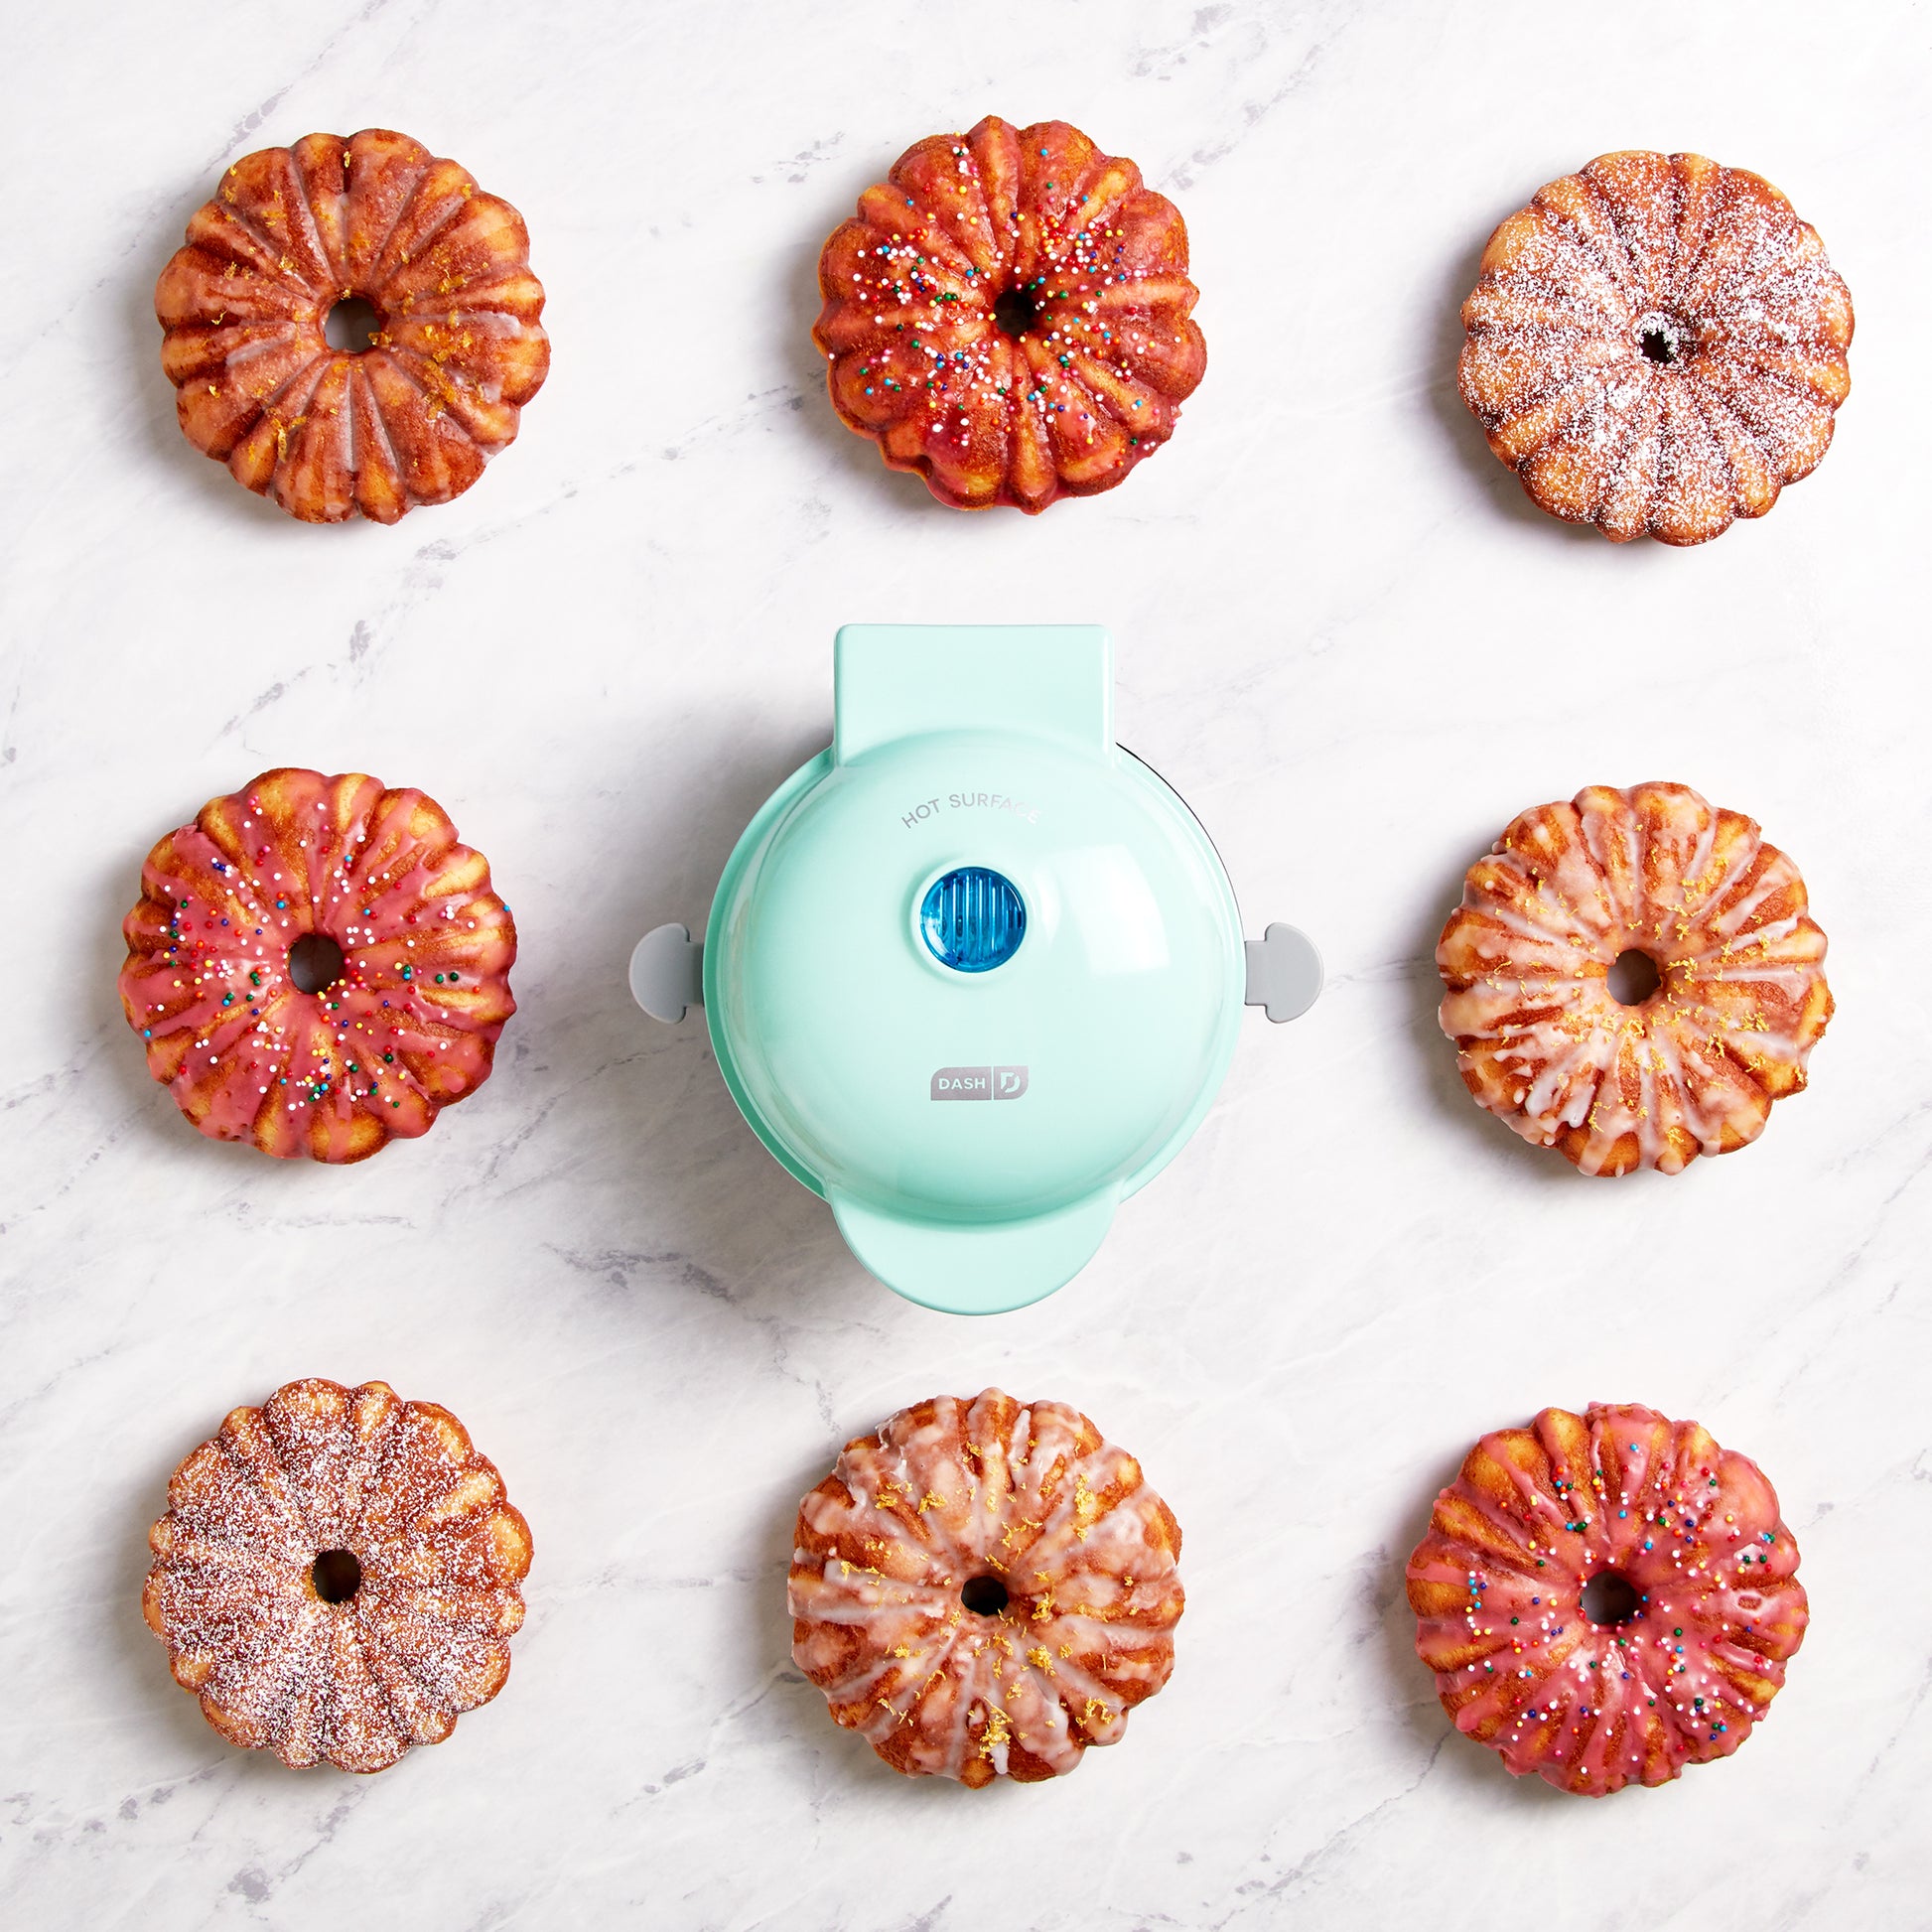 HOW TO USE THE MINI BUNDT CAKE MAKER FROM DASH ~ So Easy and Super Fun! 